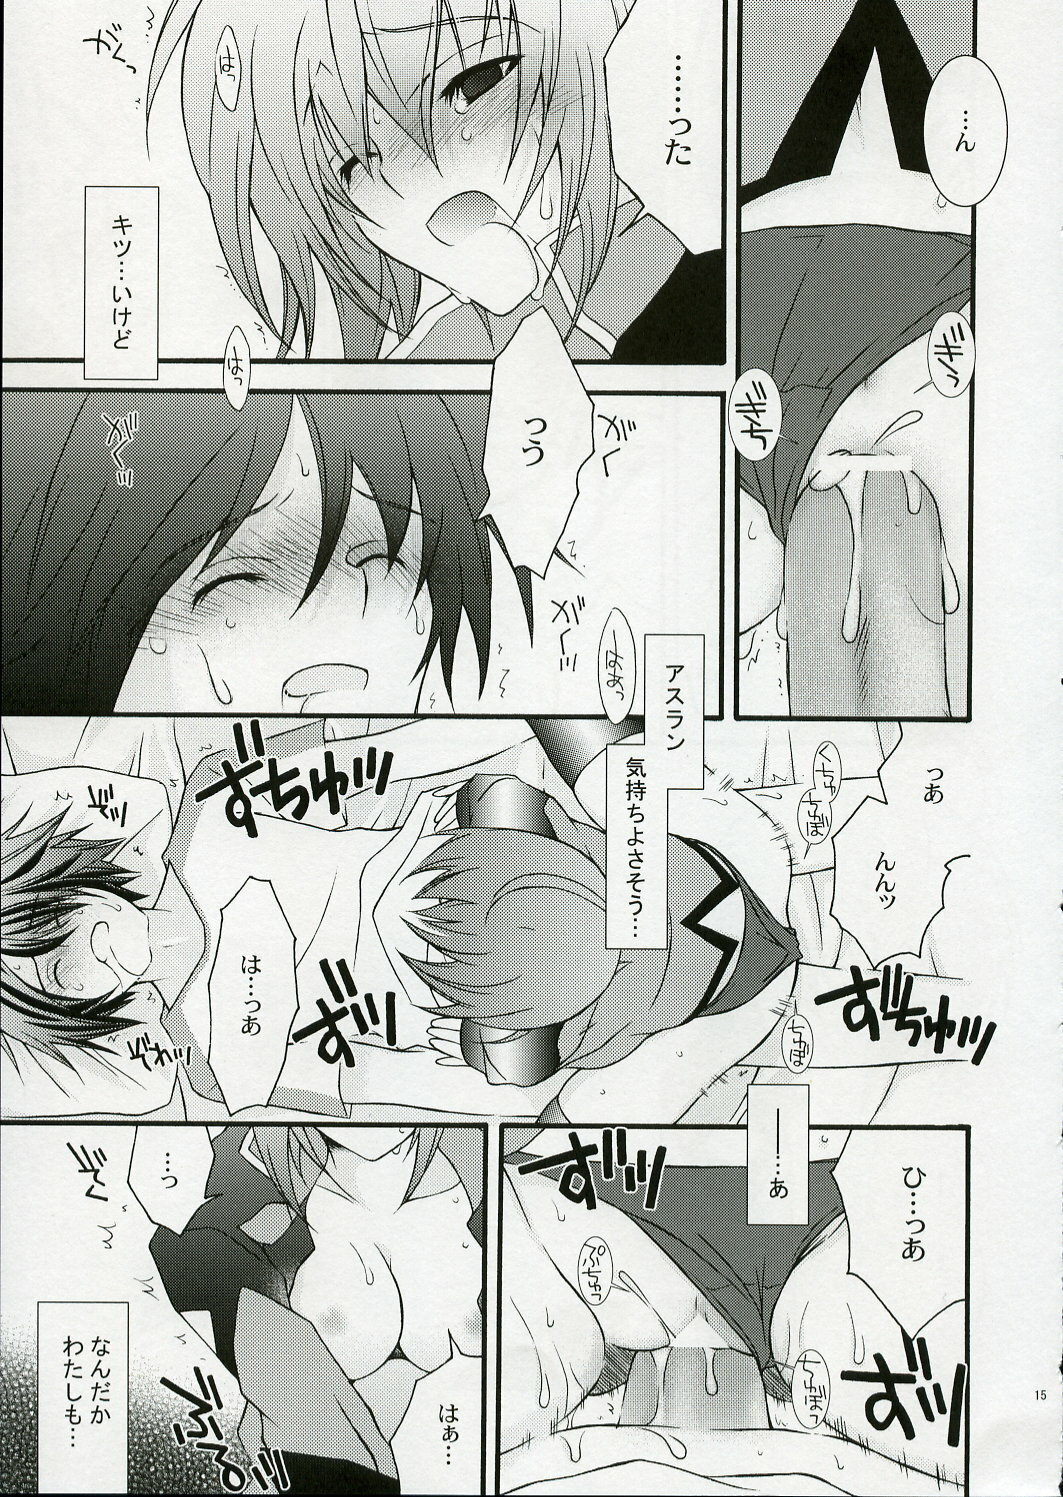 (SC28) [YLANG-YLANG (Ichie Ryouko)] RENDEZ-VOUS (Mobile Suit Gundam SEED DESTINY) page 14 full